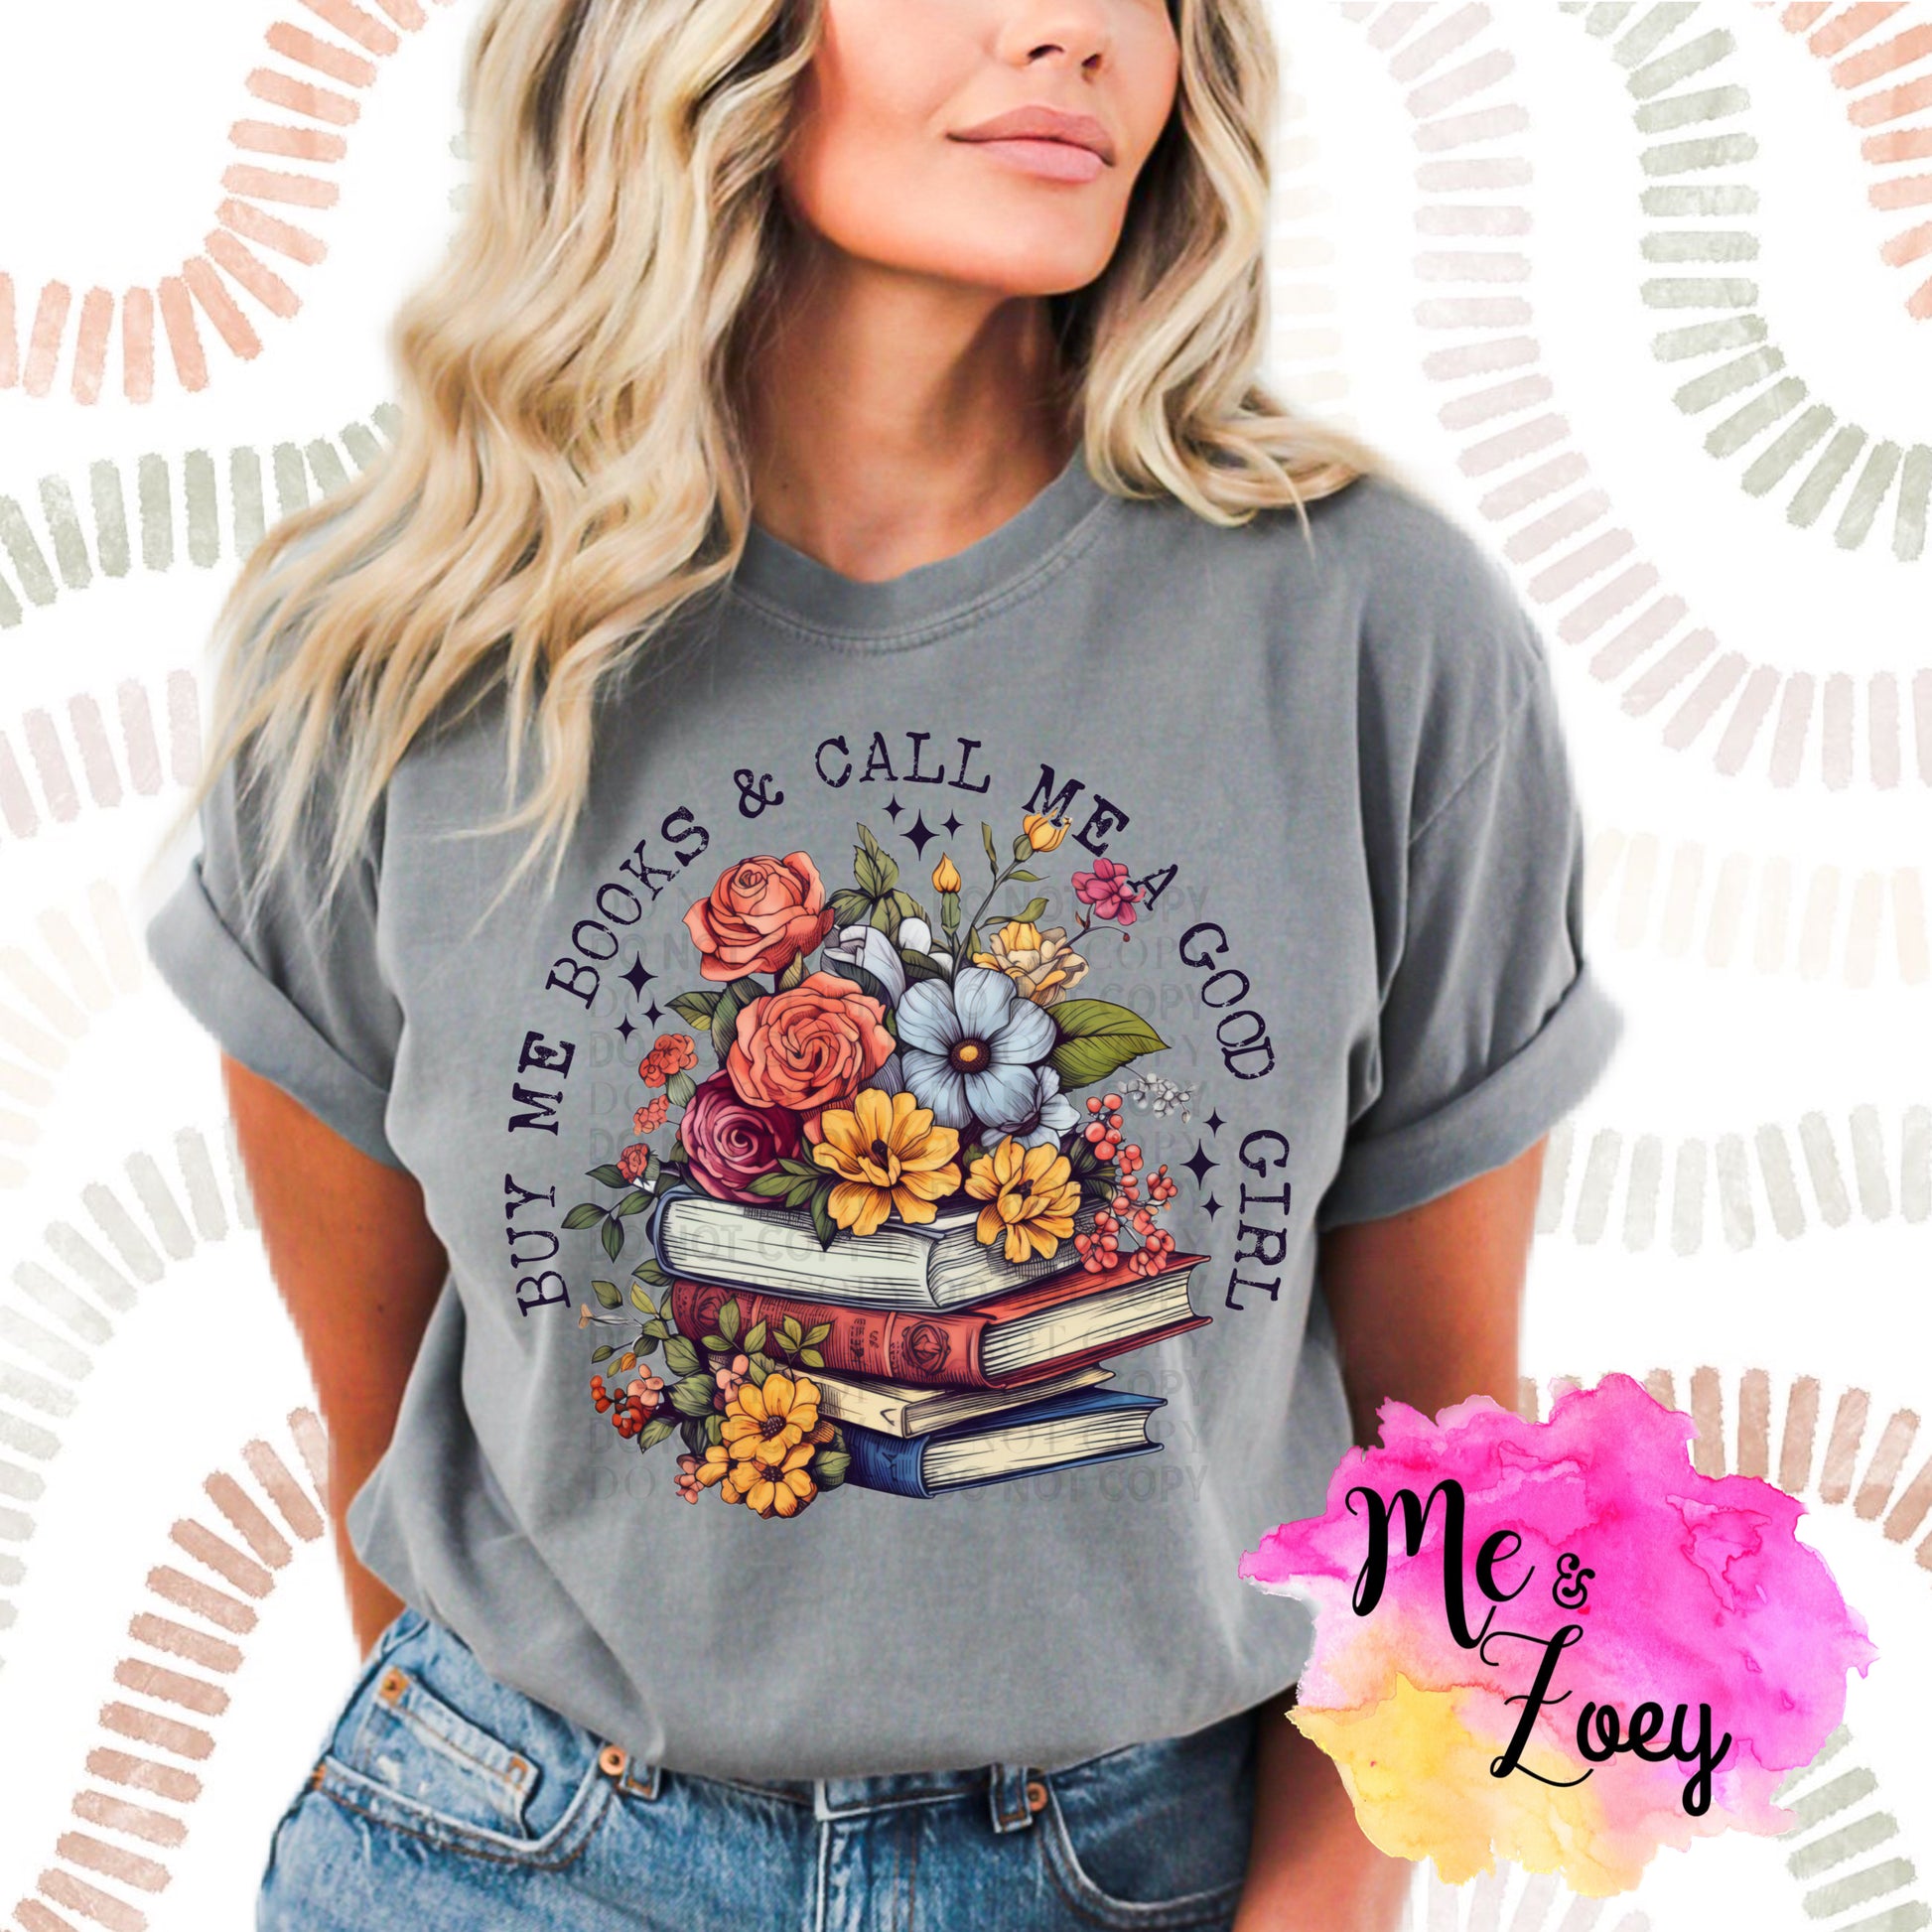 Buy Me Books Graphic Tee - MeAndZoey